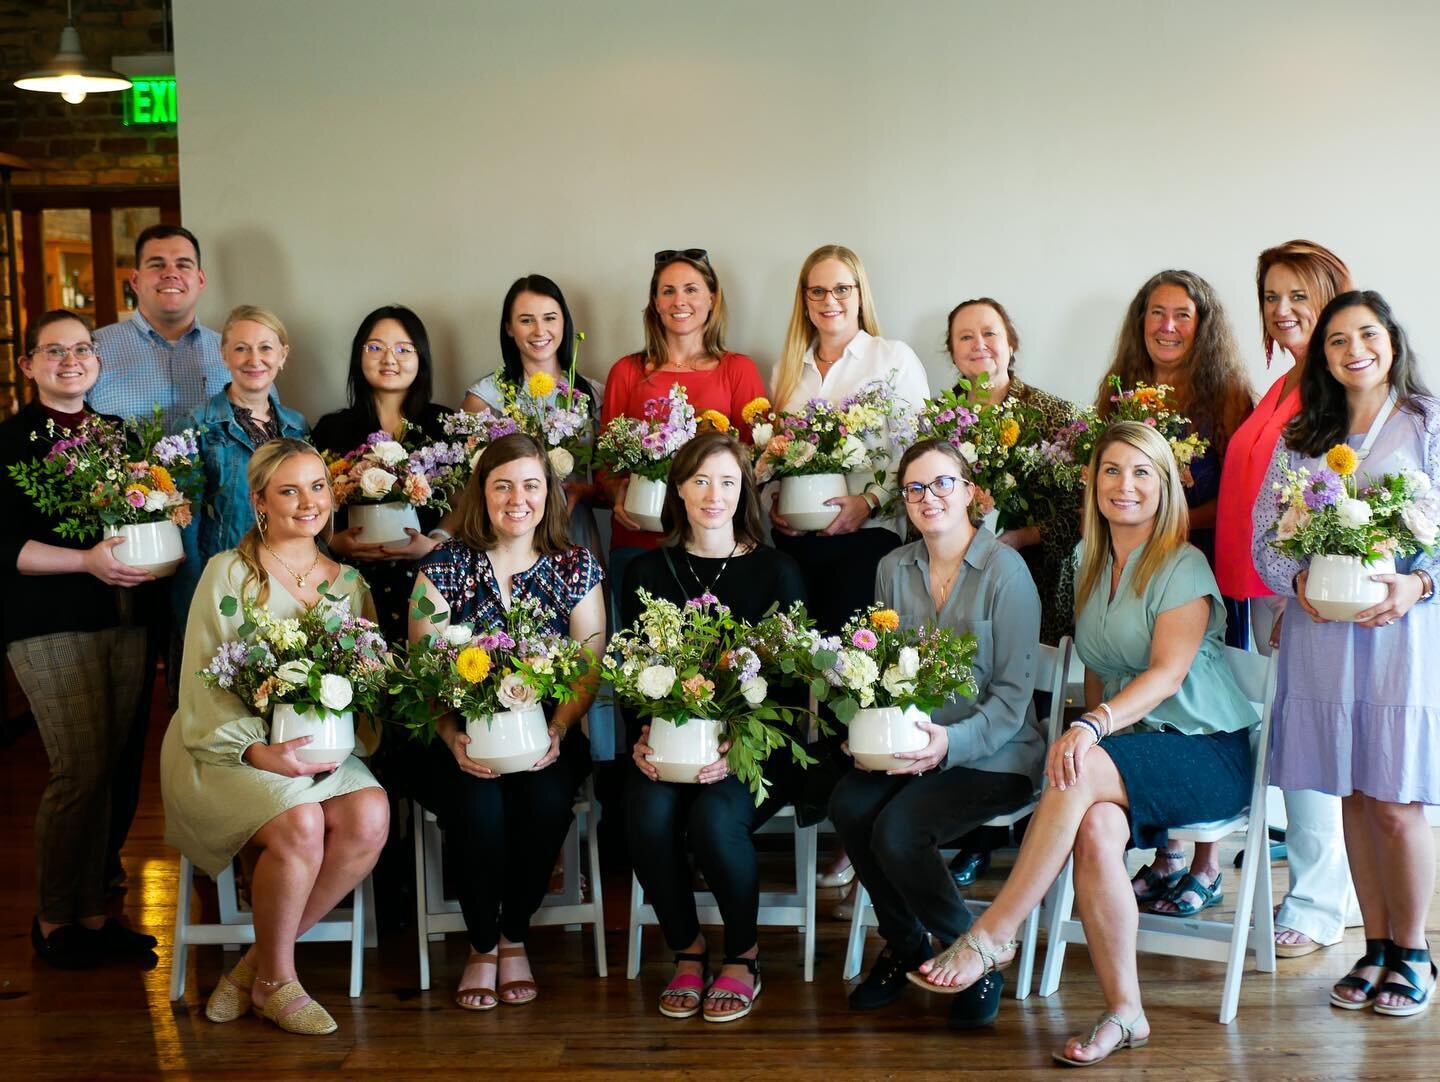 Such a wonderful workshop event today @bodaciousshops with @tarkett_al.fl + our hosts! @3form_alabama, @blair_gornto , @jmitch504 

Photographer: @sarahwattsphotography 

Thank you for your assistance @whatsjendoingnow, @hellosarahwatts, and lavender